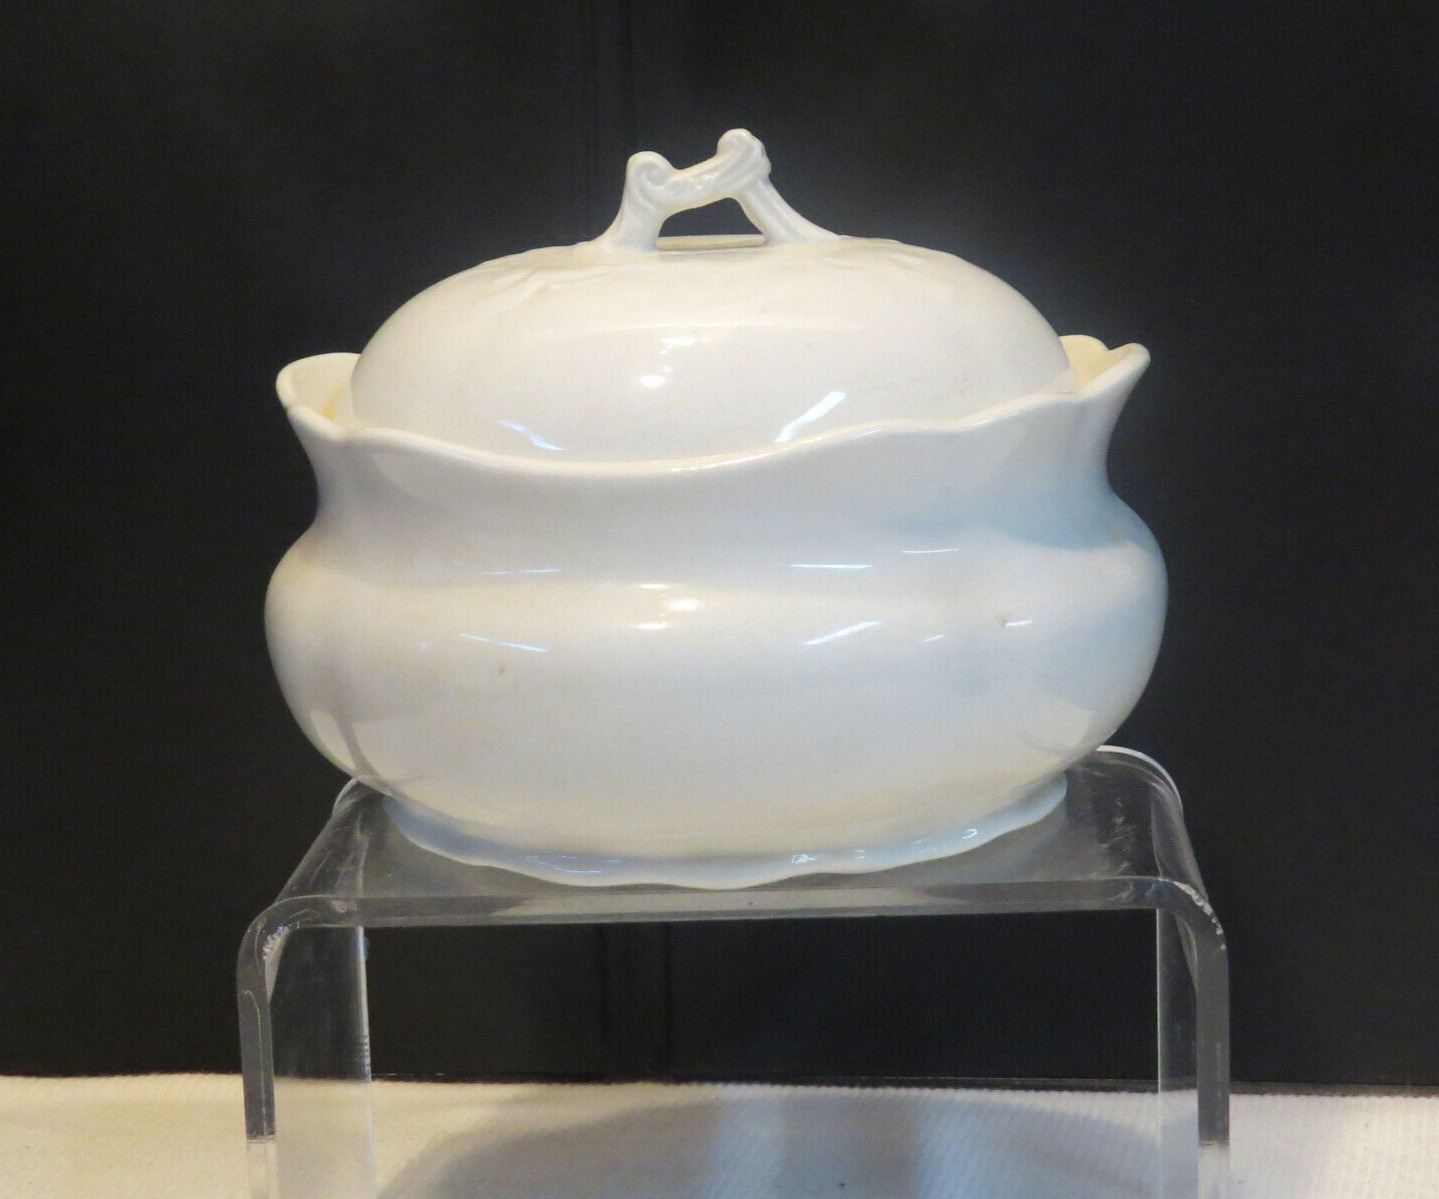 RARE Antique Homer Laughlin ARNO Covered Soap Dish, c. 1899-1907, Solid White